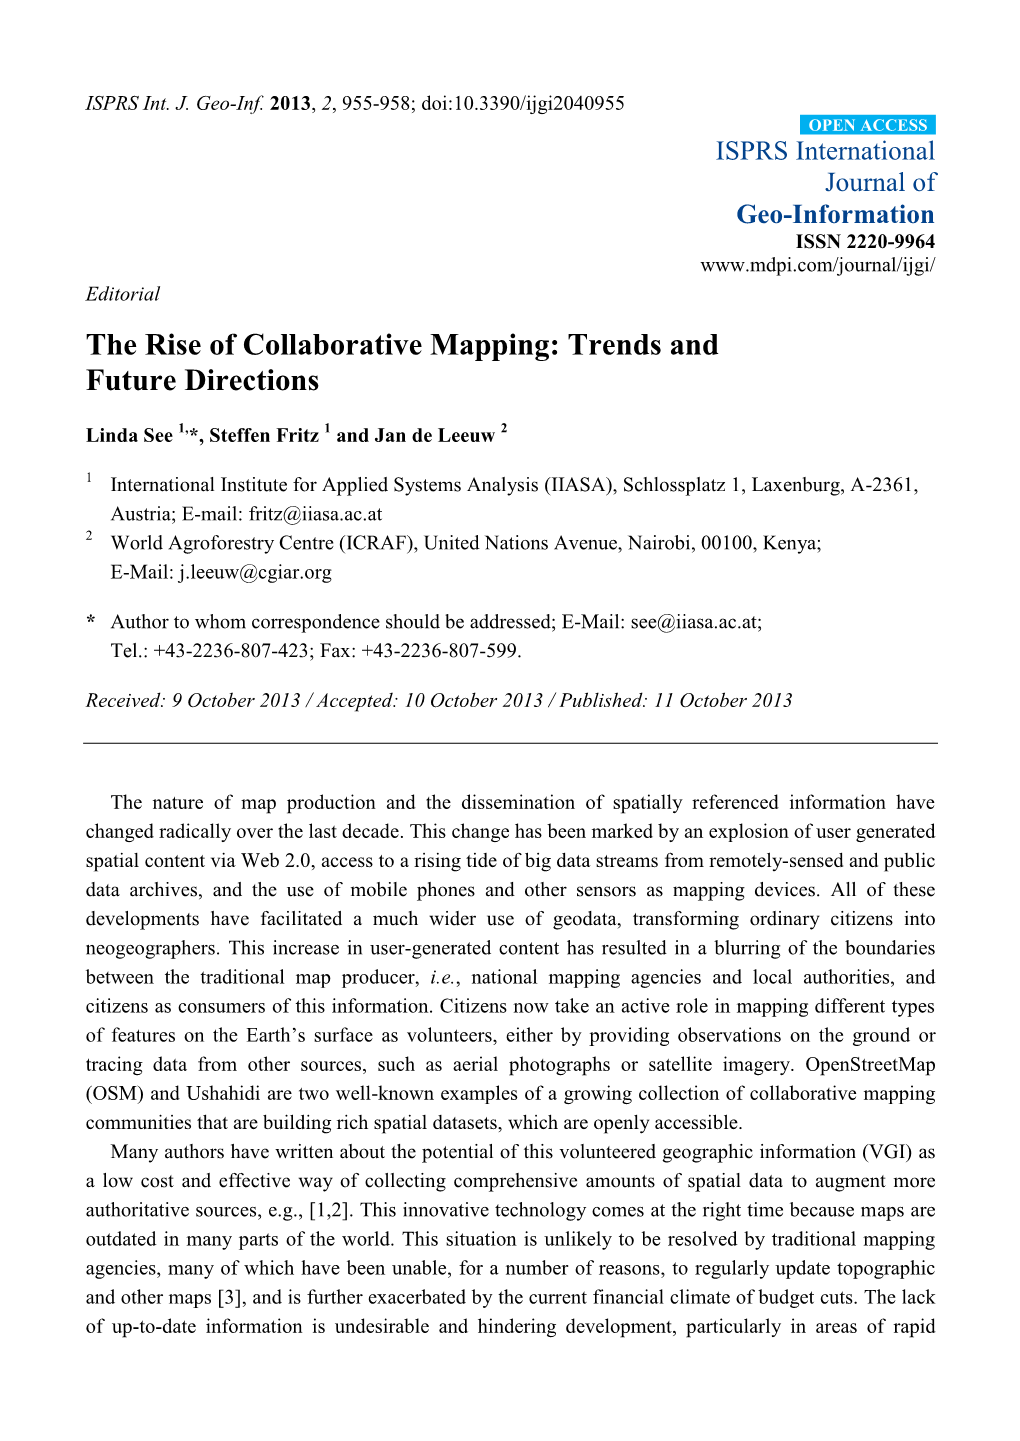 The Rise of Collaborative Mapping: Trends and Future Directions